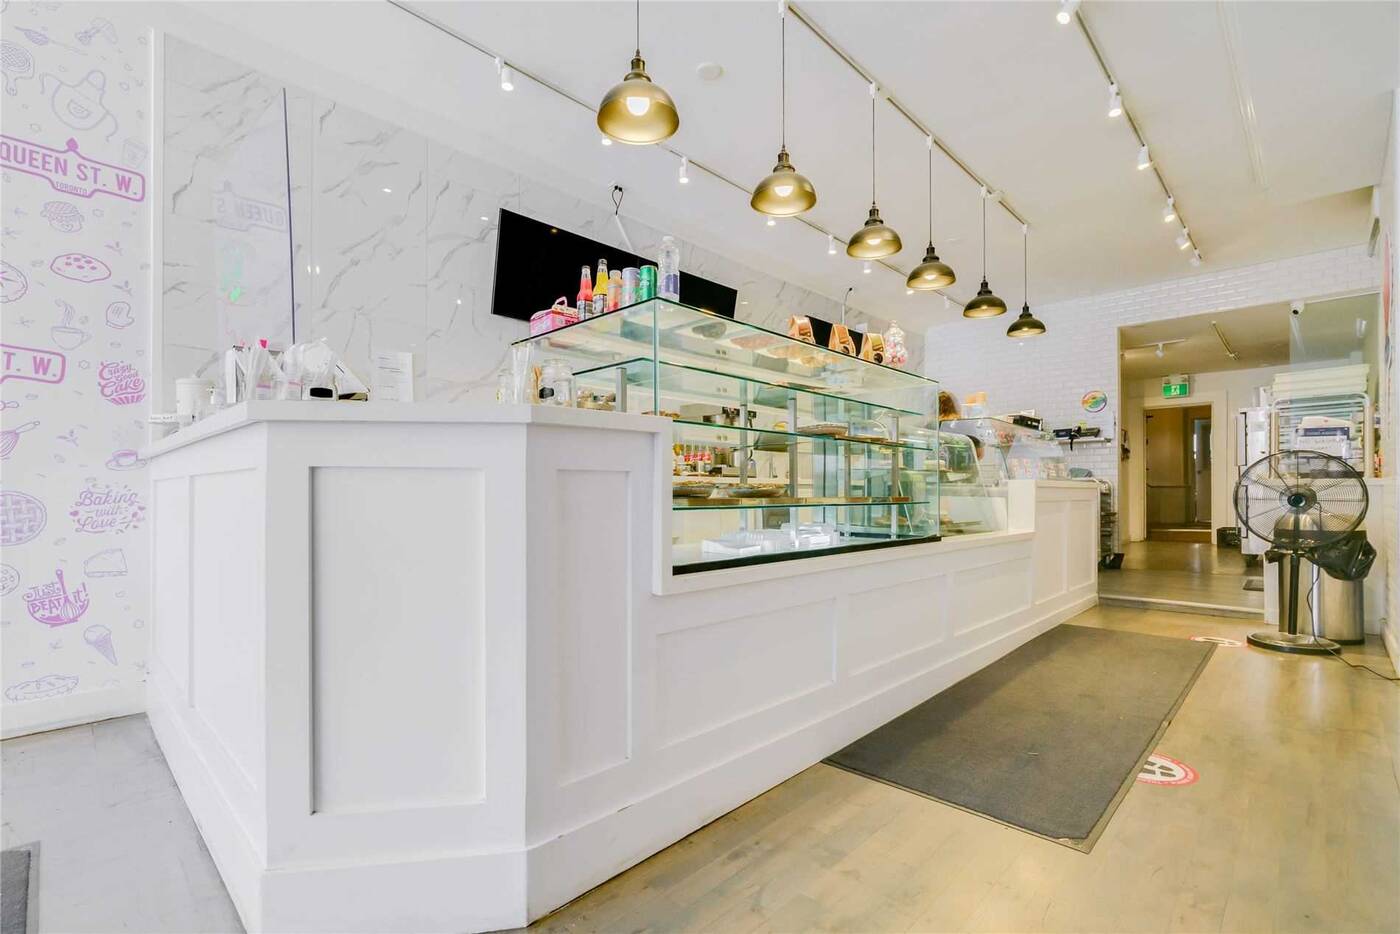 Toronto bakeshop building is for sale for $4 million